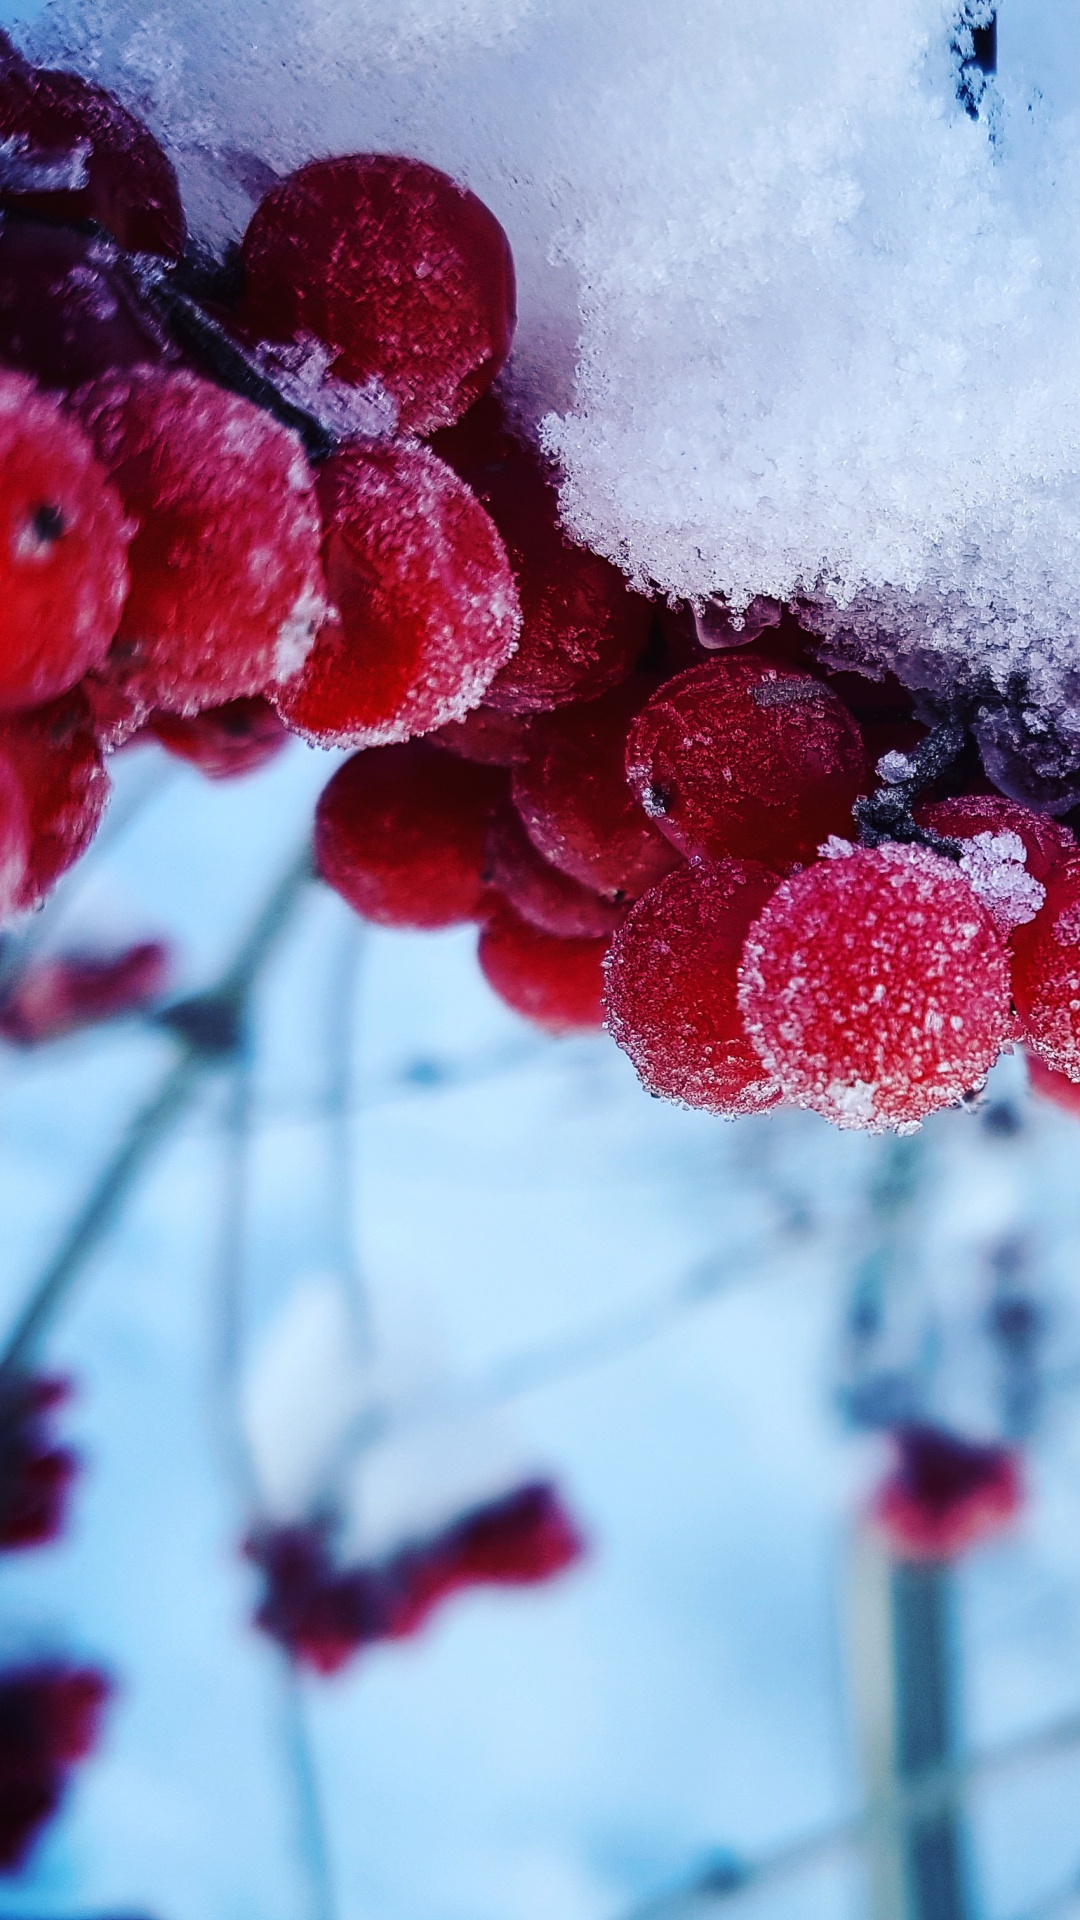 Red Round Fruits Covered With Snow. Wallpaper in 1080x1920 Resolution